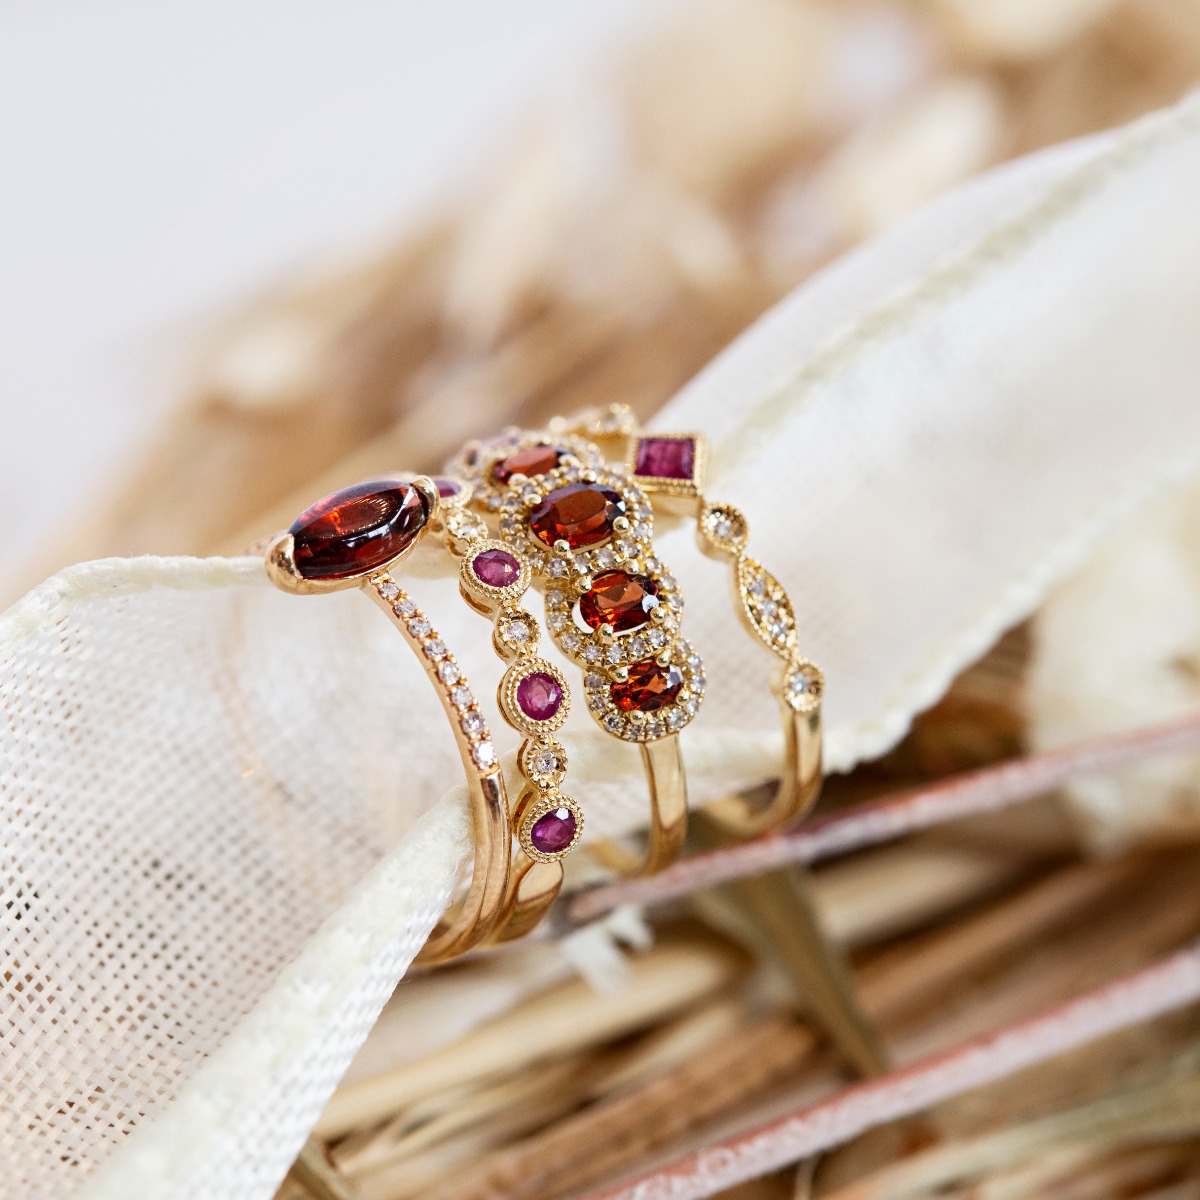 The Ultimate Wedding Band Trends for 2022